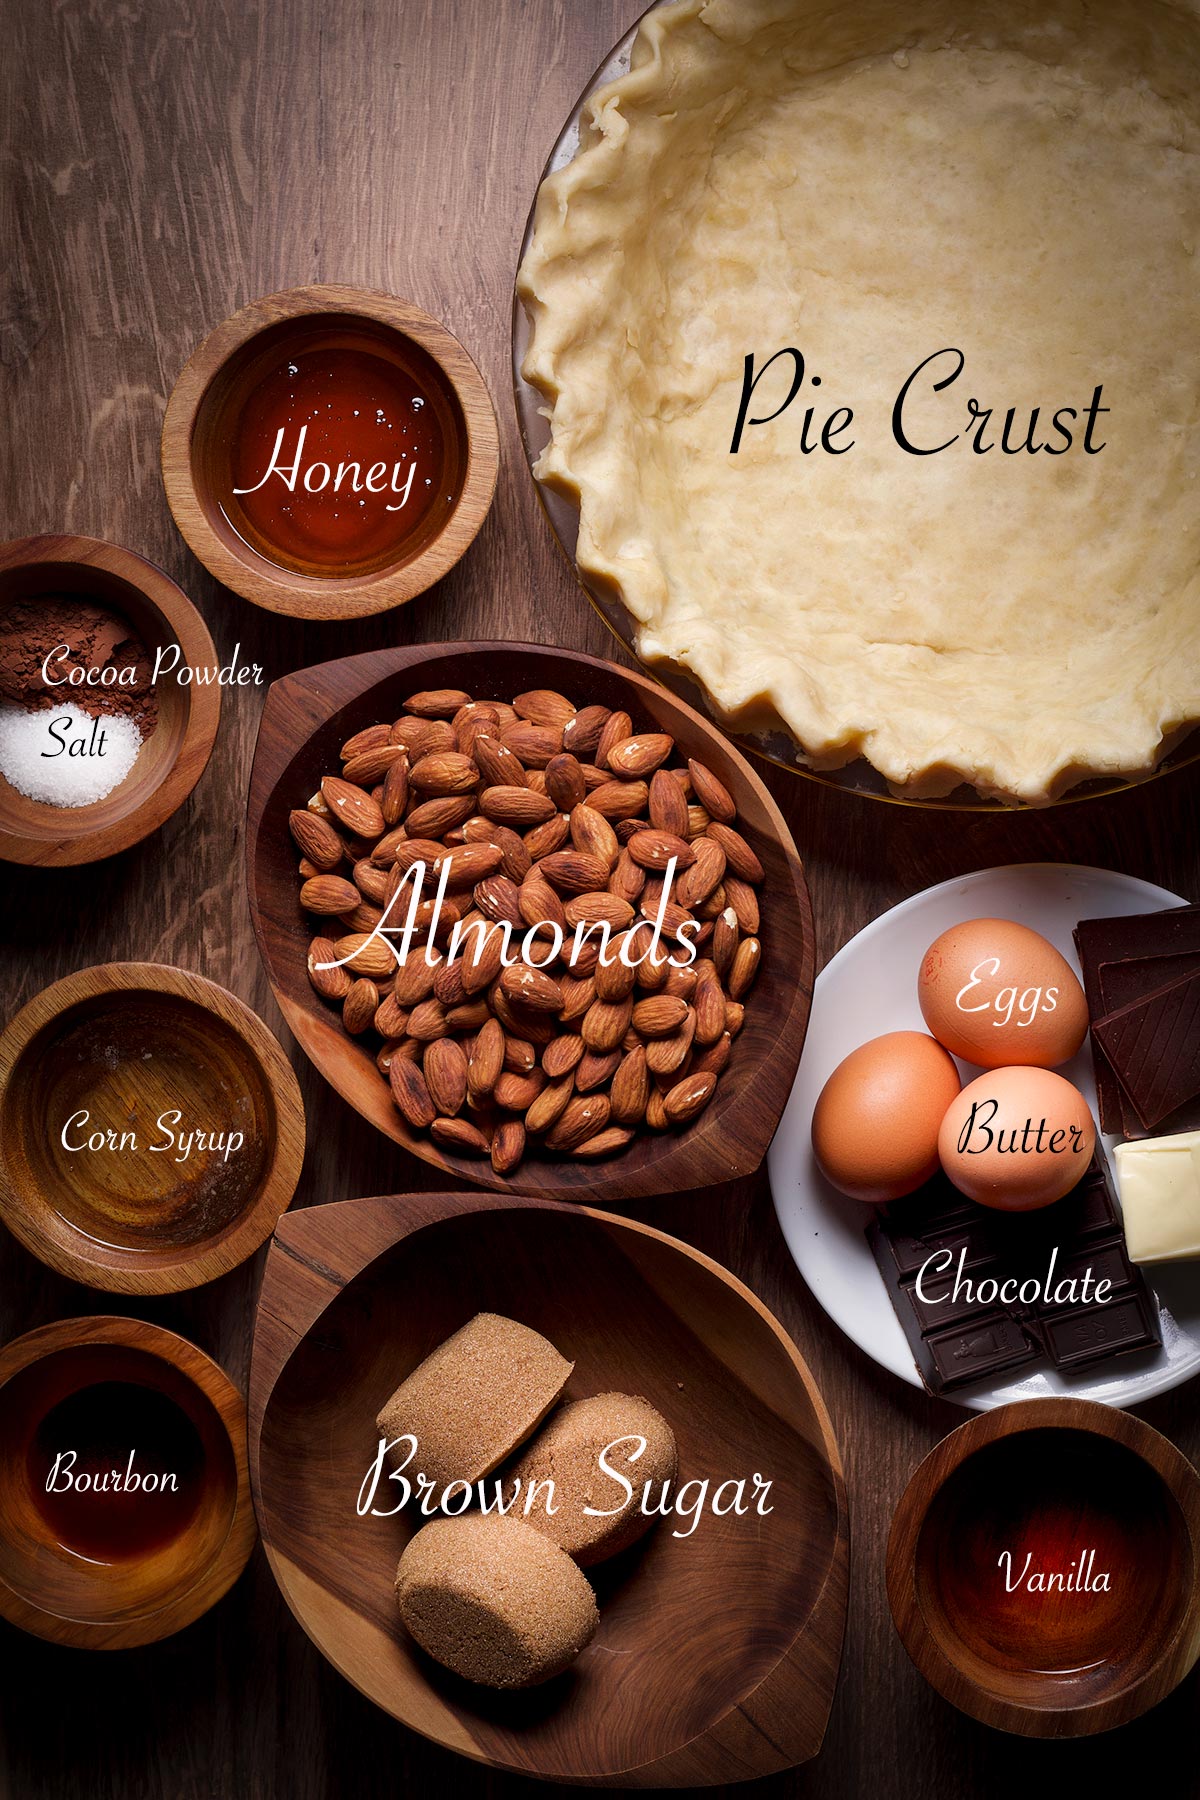 All the ingredients needed to make a chocolate almond pie.